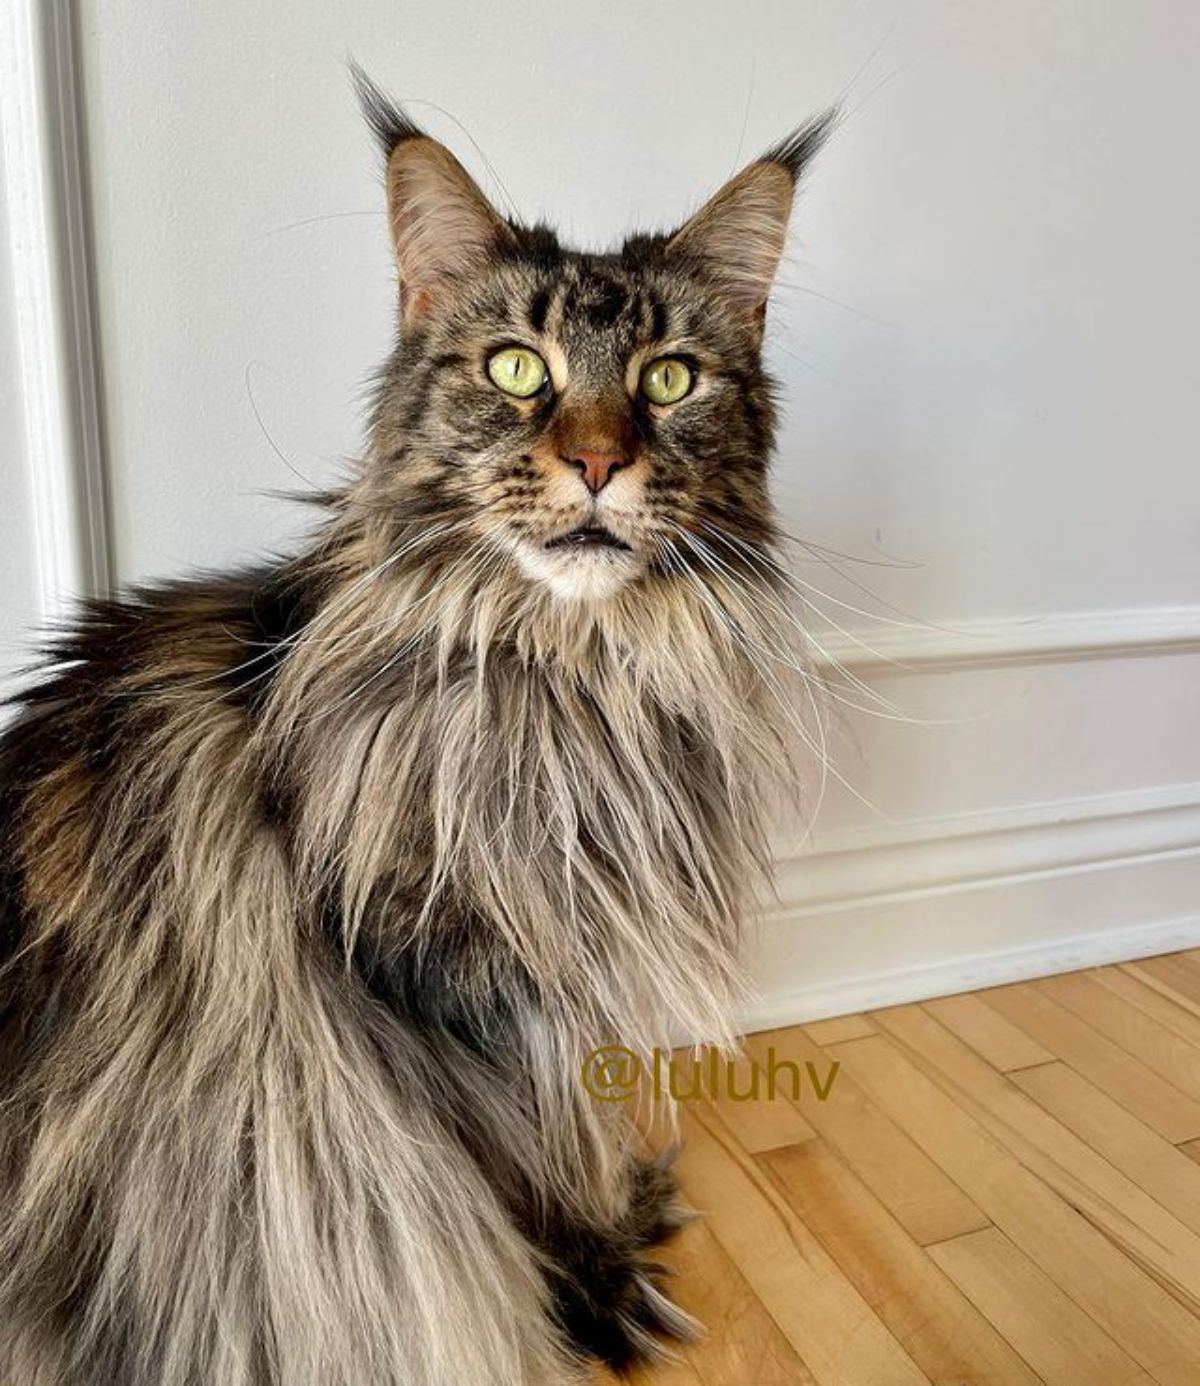 A fluffy gray maine coon sitting on a floor.